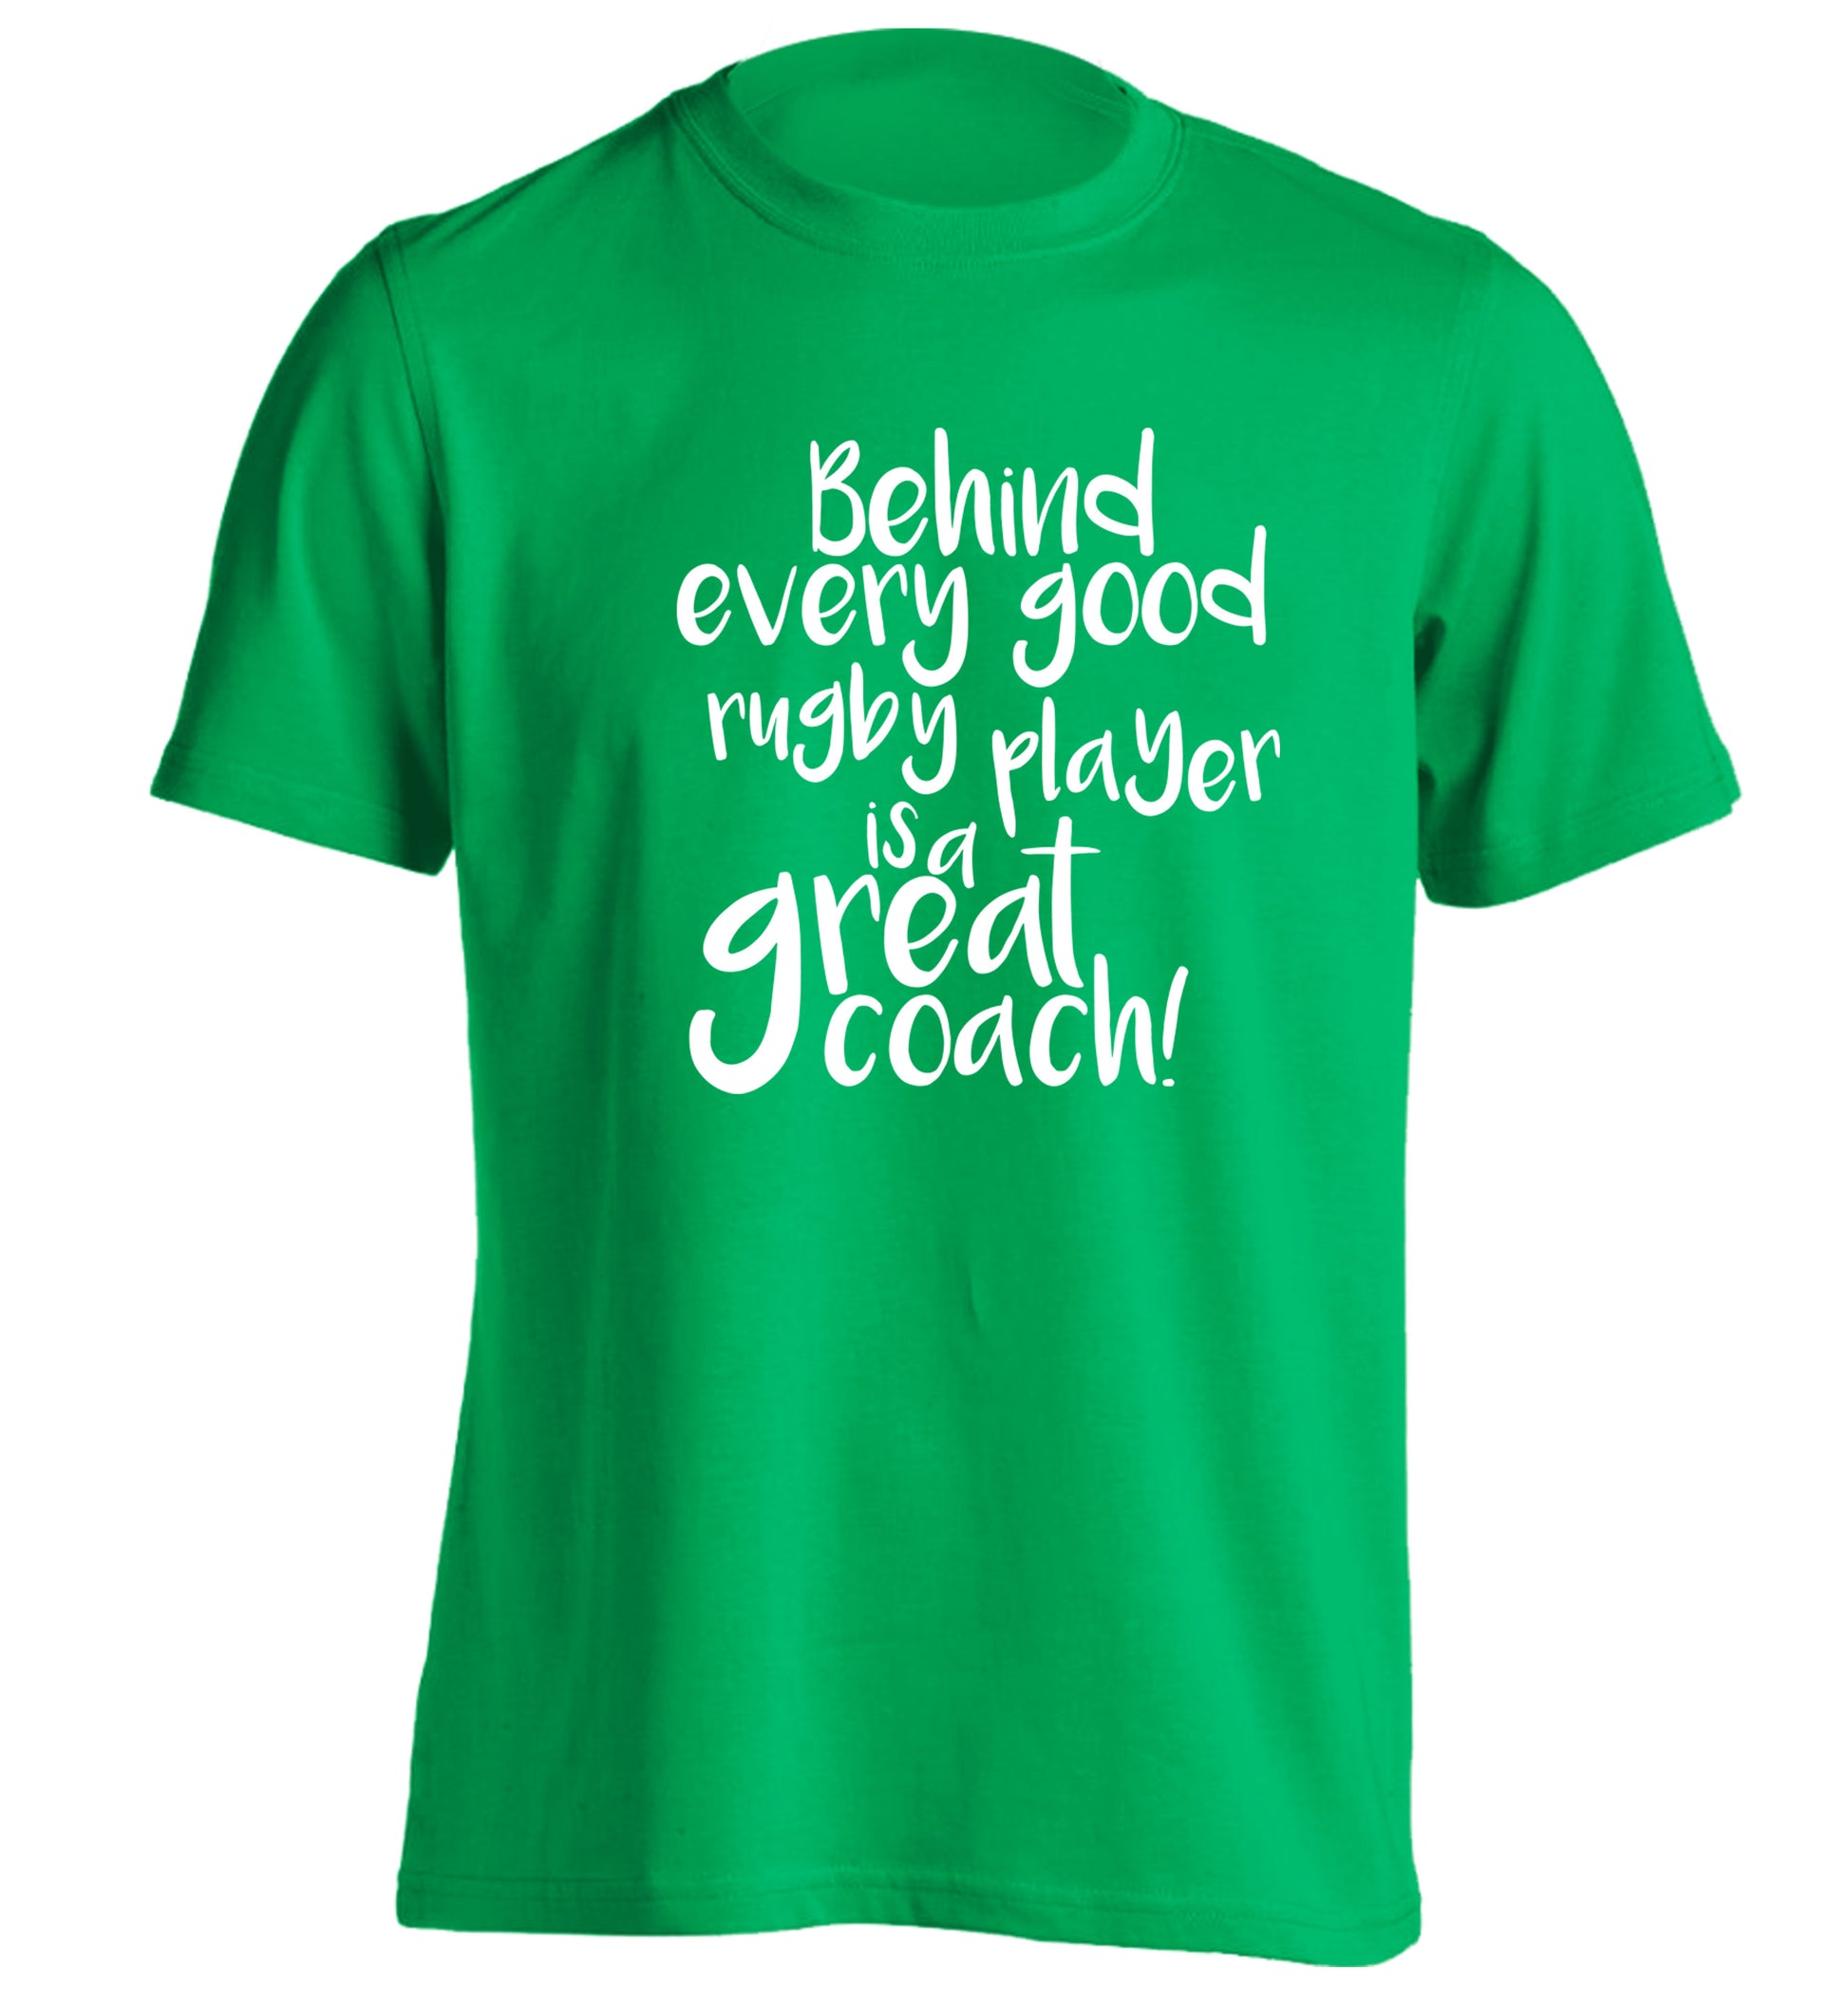 Behind every goor rugby player is a great coach adults unisex green Tshirt 2XL